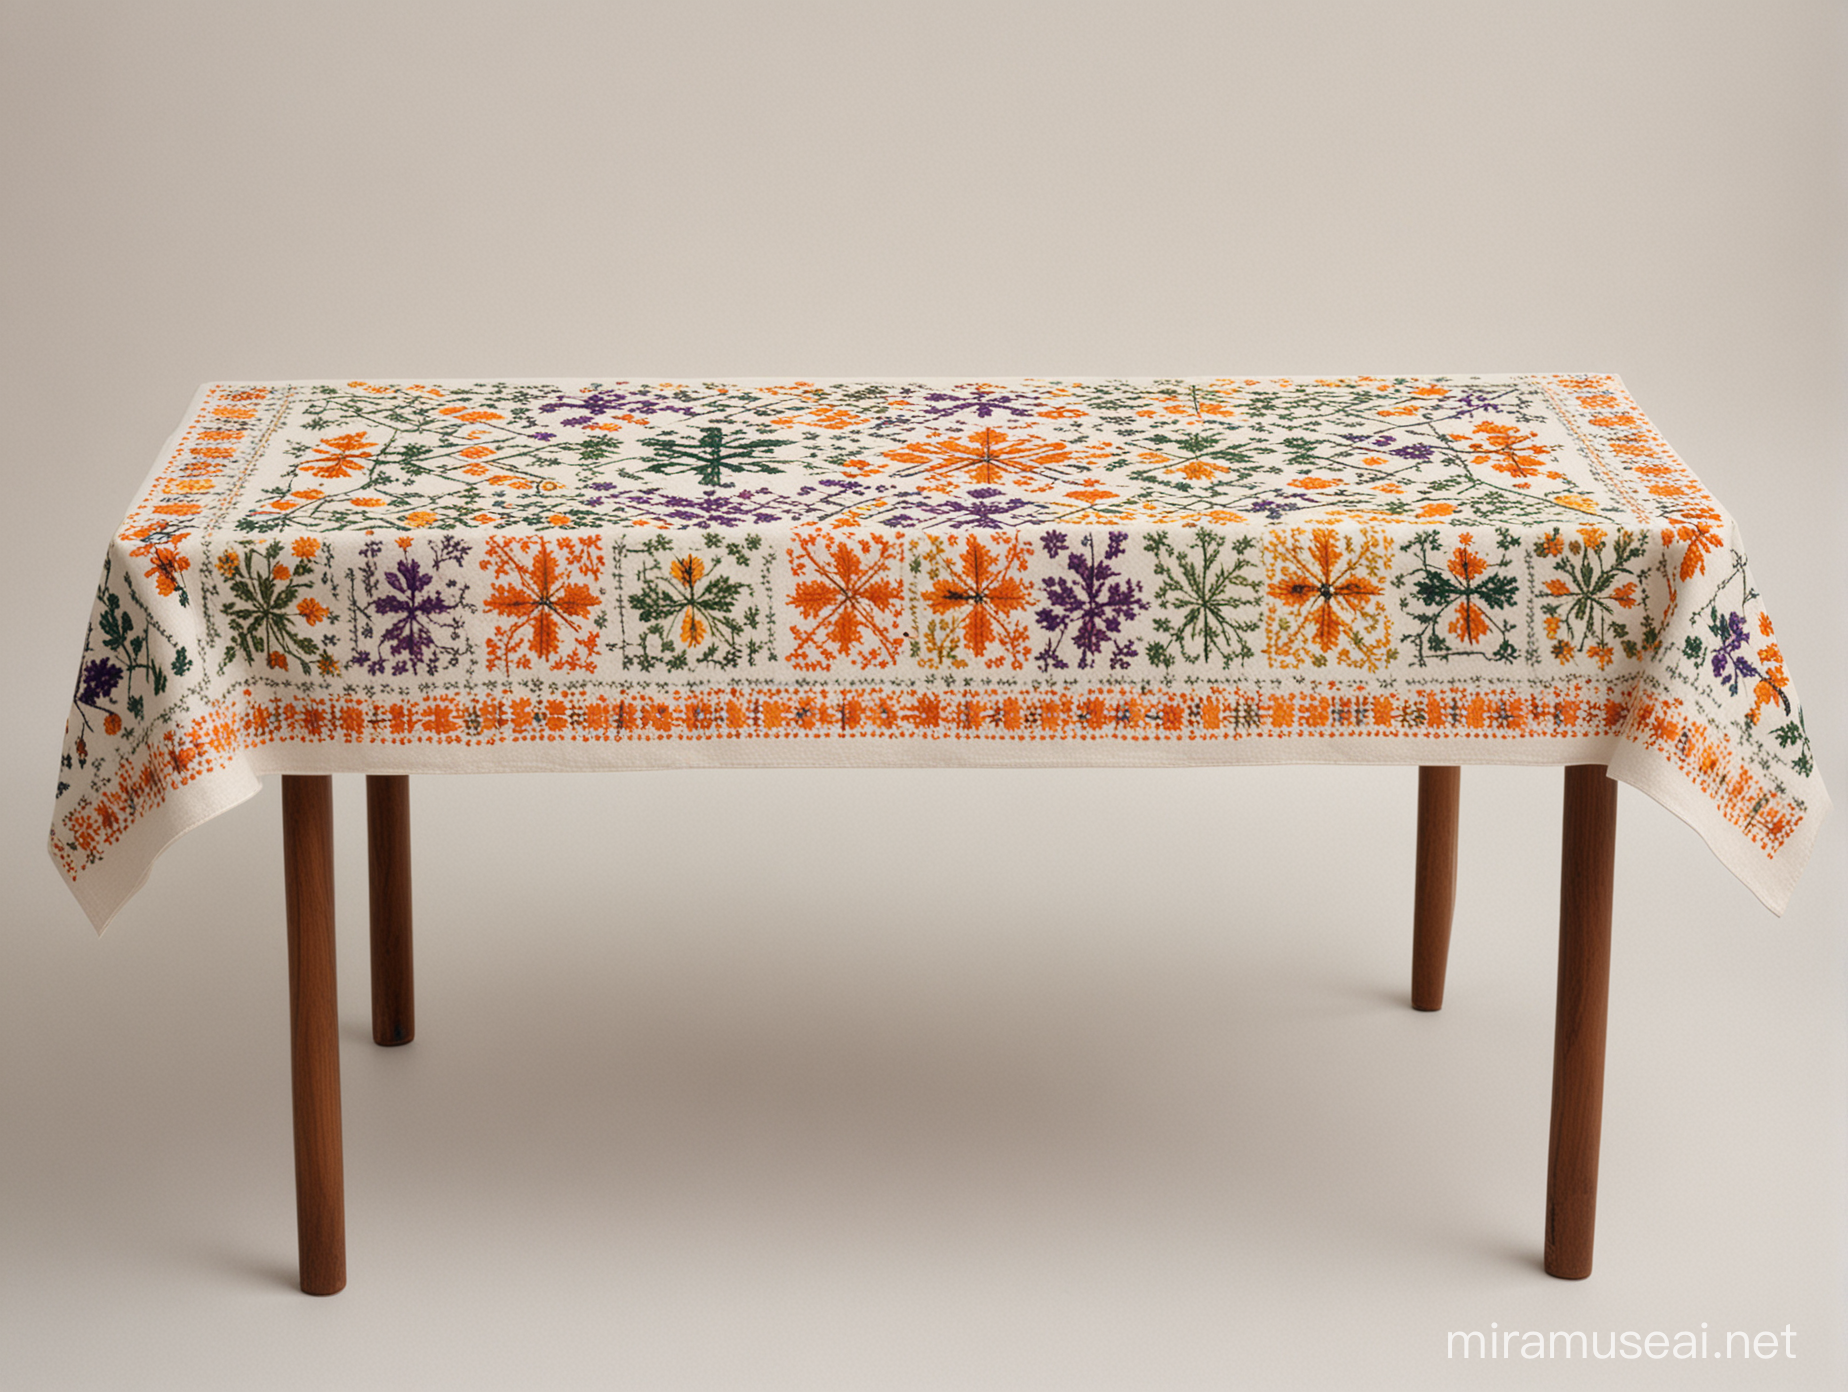 xa rectangle table, in perspective, with a hand embroidered, cross stitched, folk pattern in secondary colour palette, like violet, orange, greens